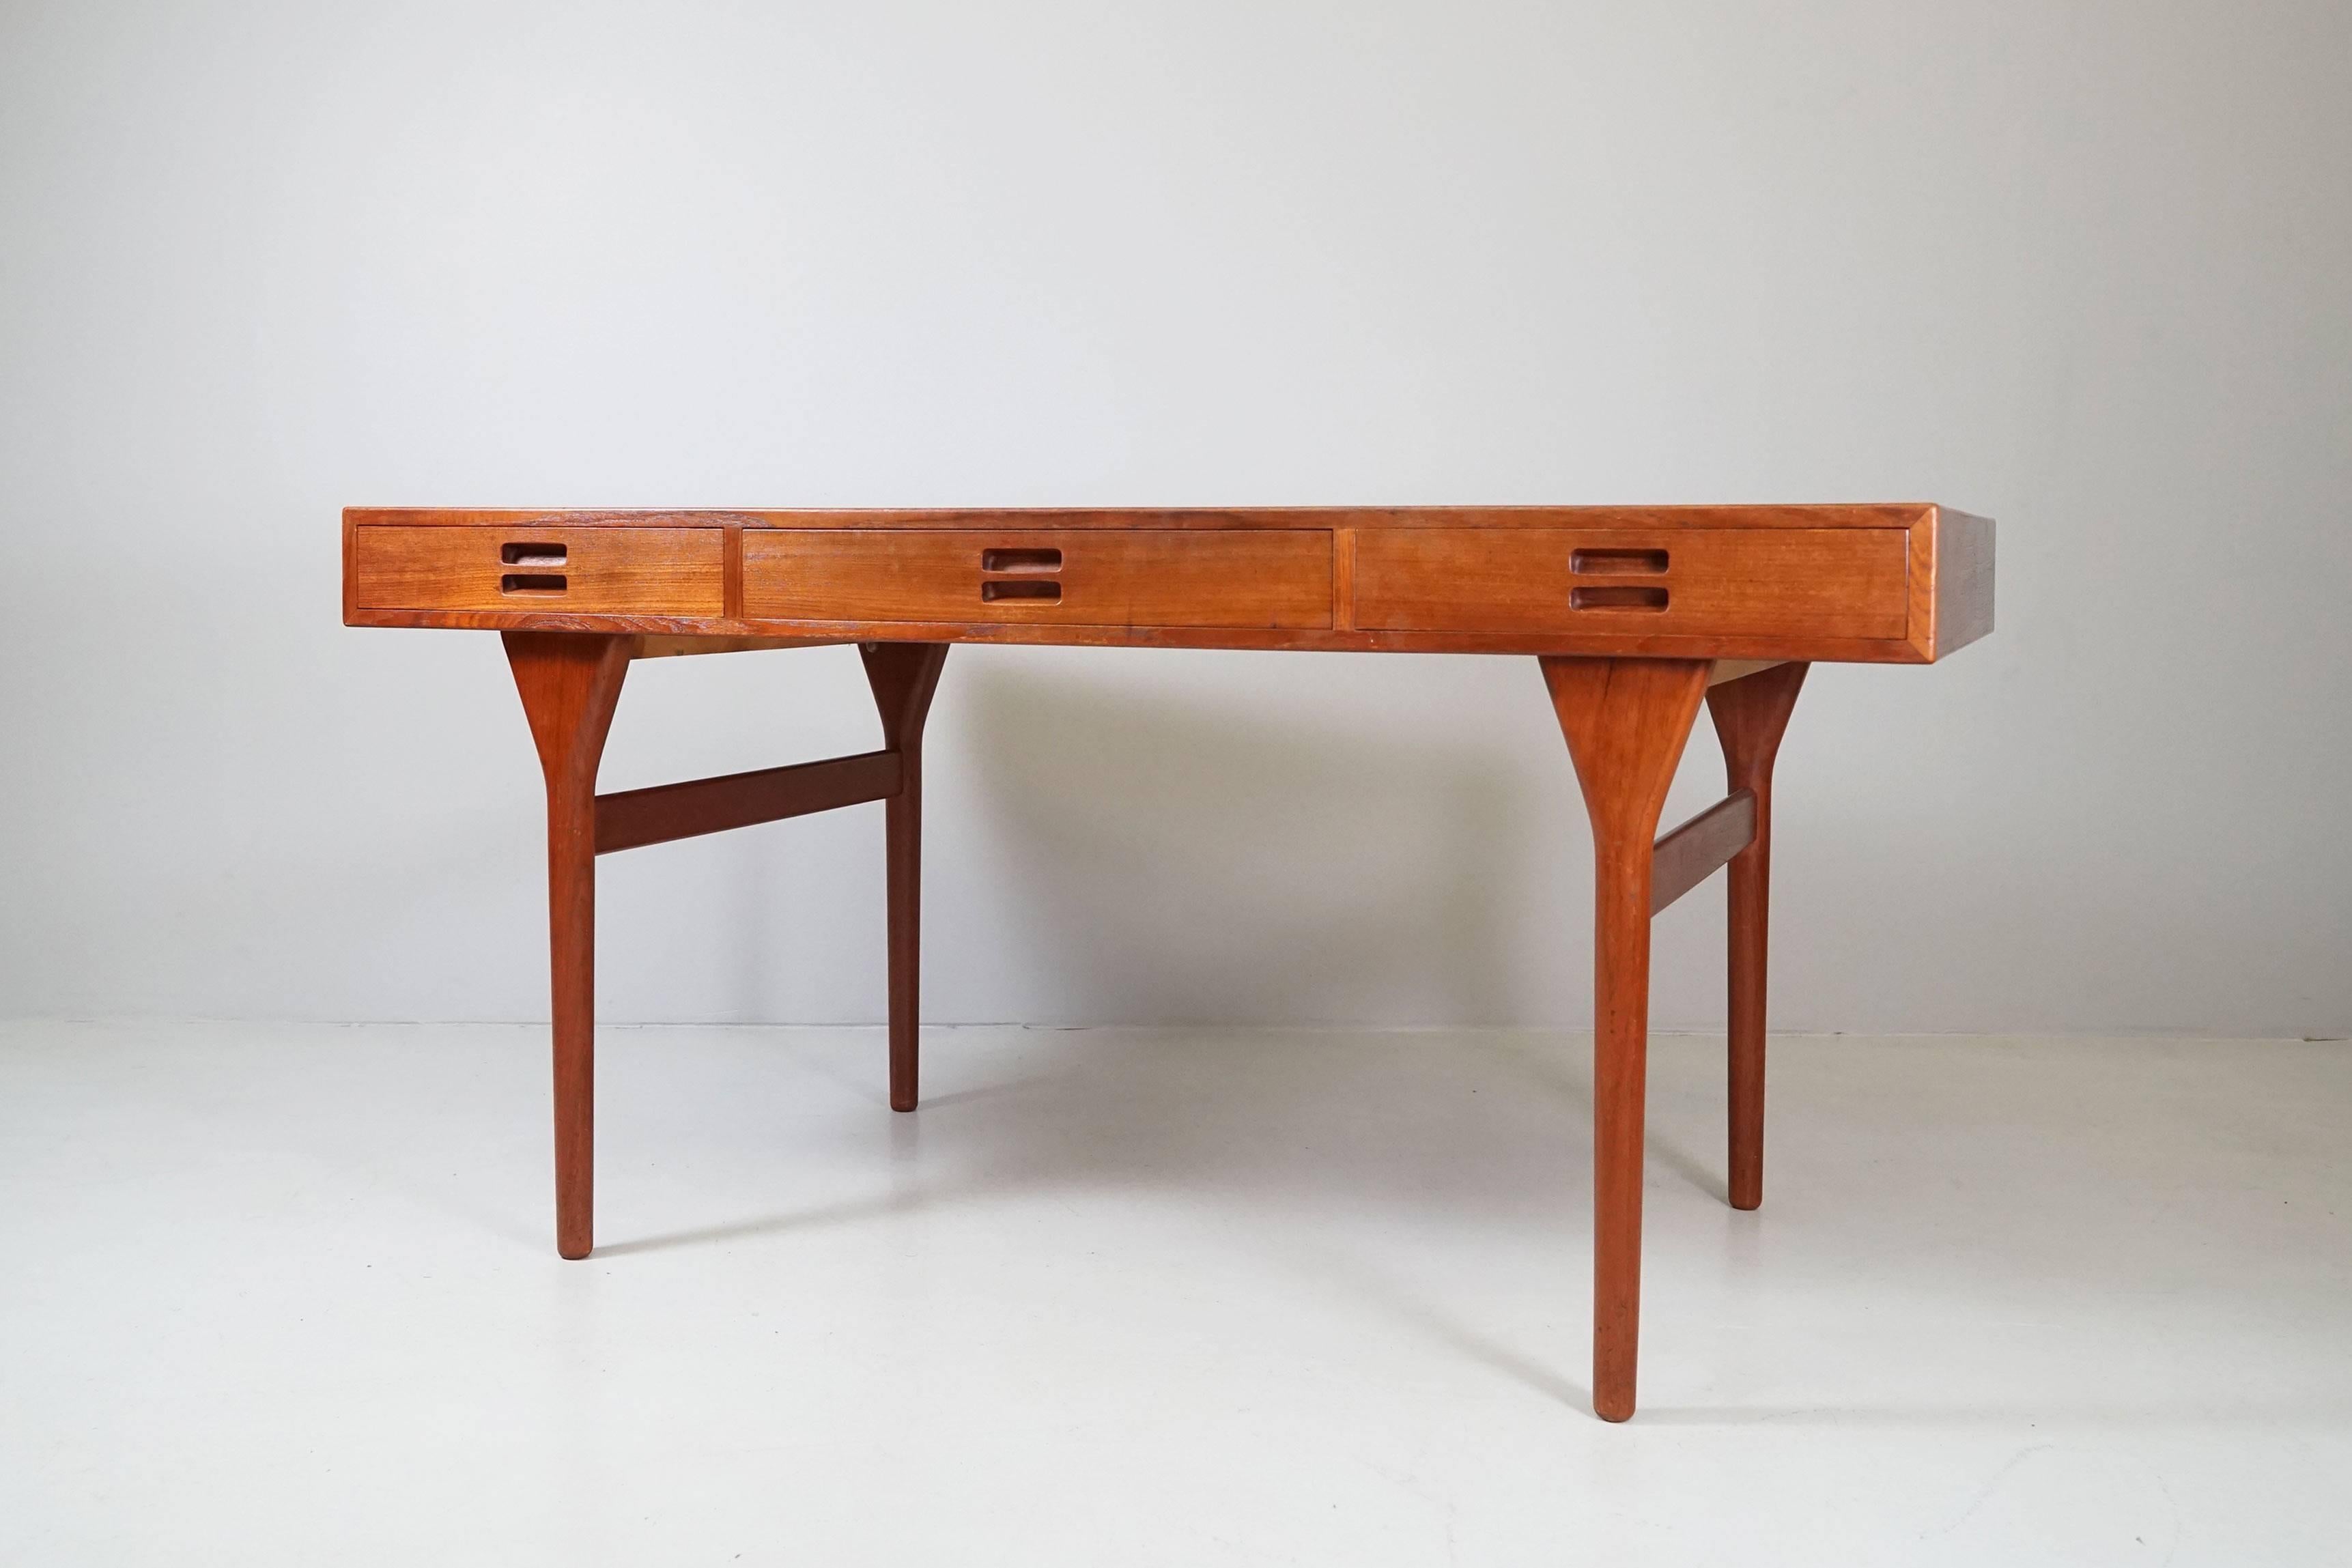 Elegant designed freestanding three-drawer desk designed by Nanna Ditzel, one of the best known Danish designers, in 1958 and produced in 1960 by Soren Willadsen Mobelfabrik.

Nanna Ditzel (1923-2005) was a cabinetmaker and became a furniture